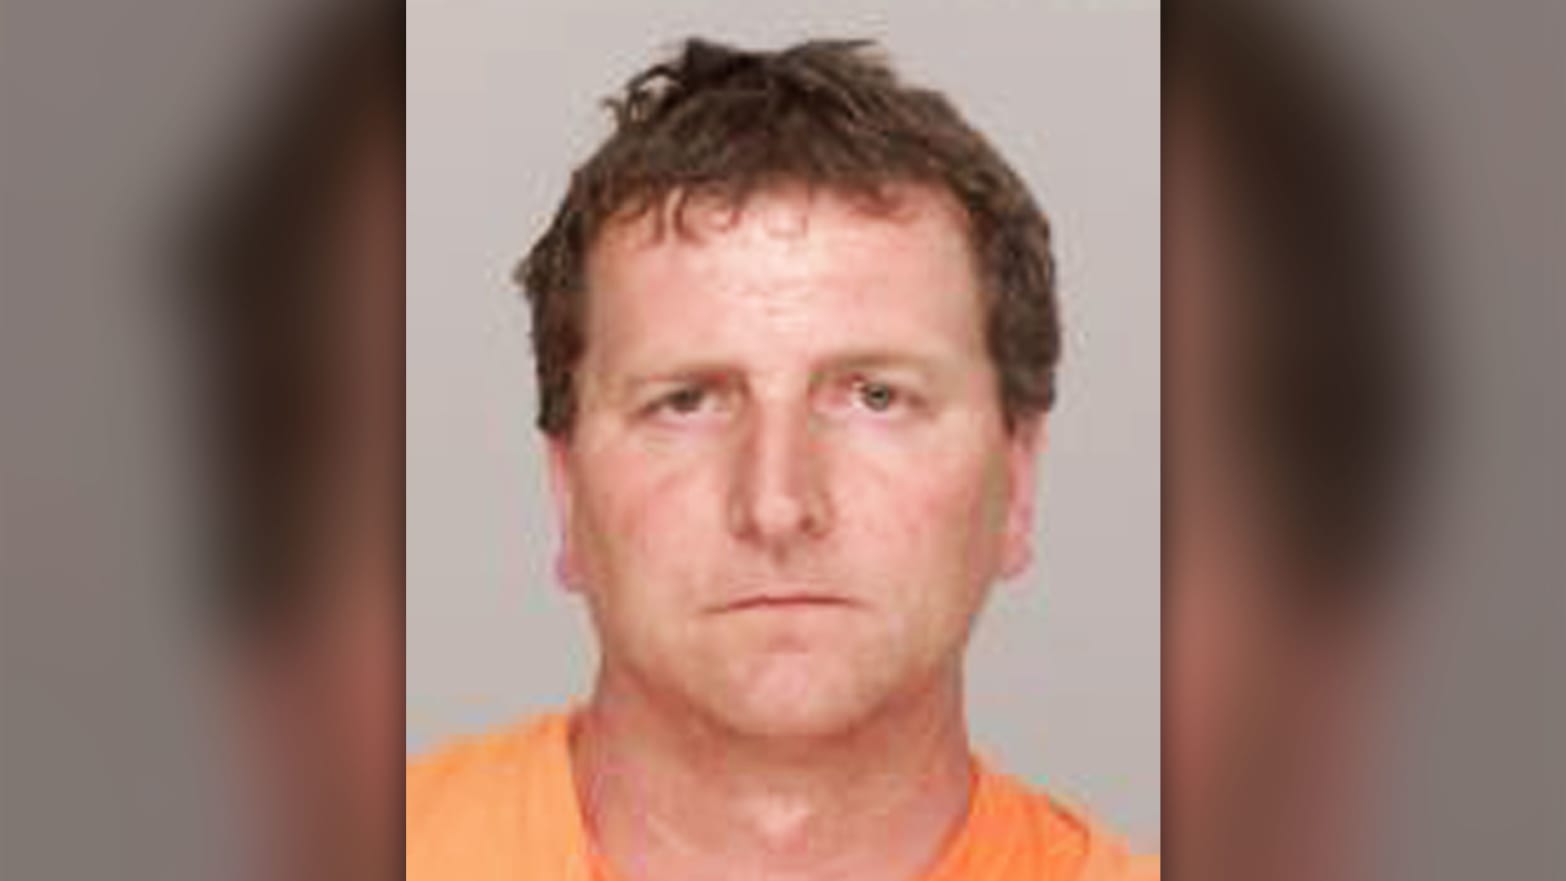 Tony McClelland has been arrested for murder after the fatal Minnesota hit-and-run of his wife, Angela McClelland.